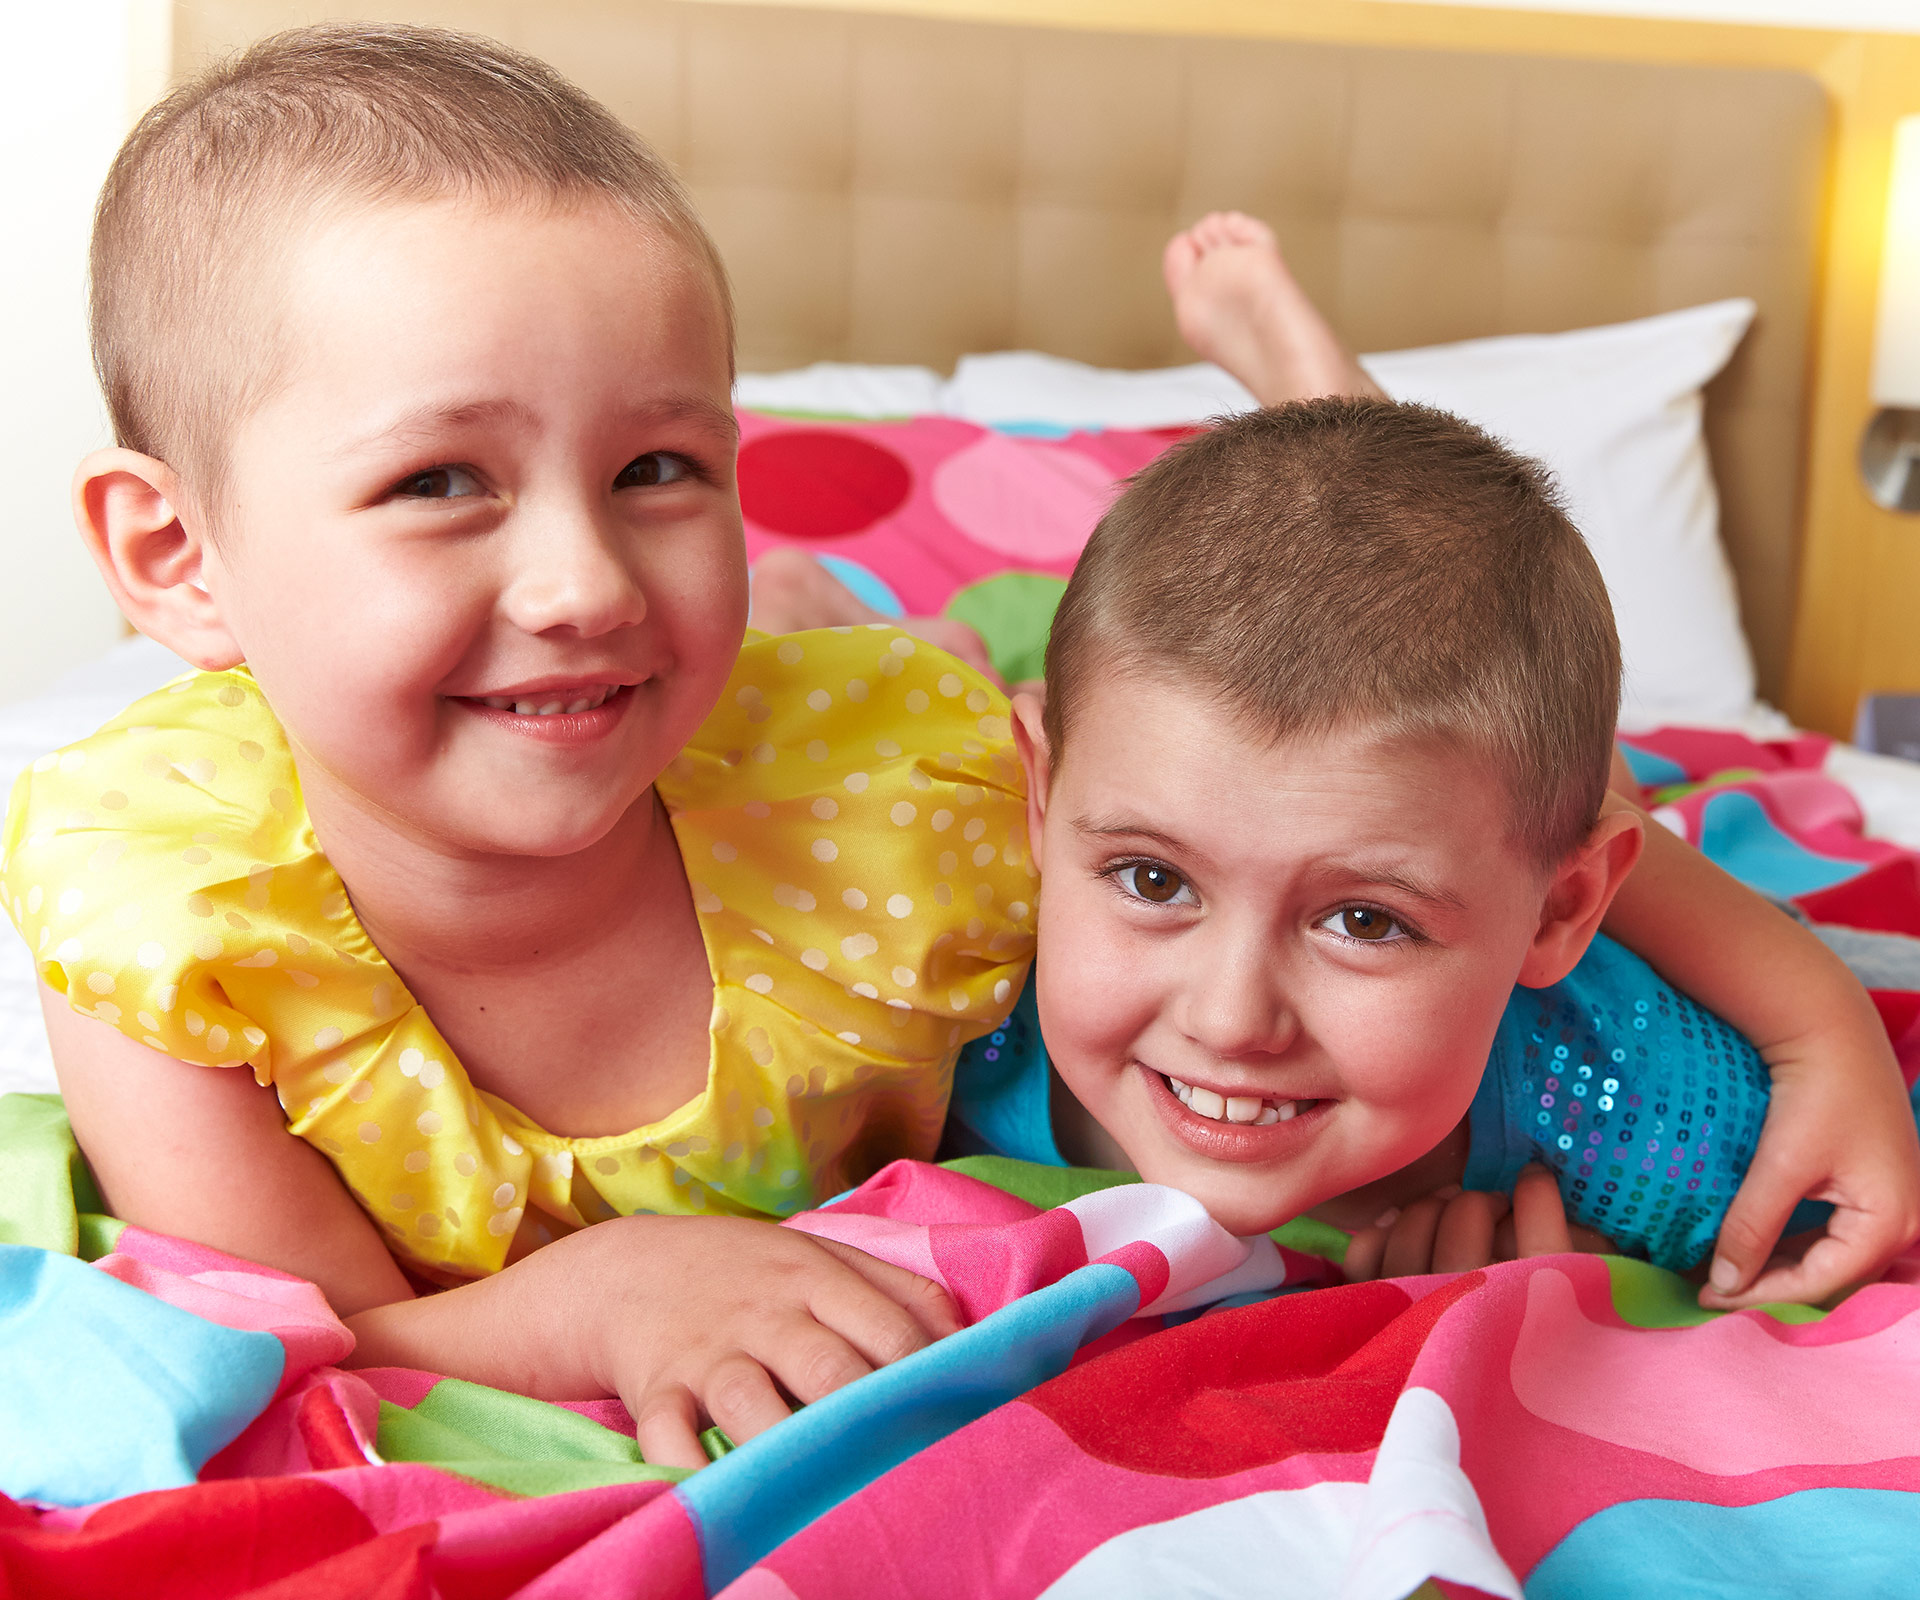 Meet the two little girls who beat leukaemia together